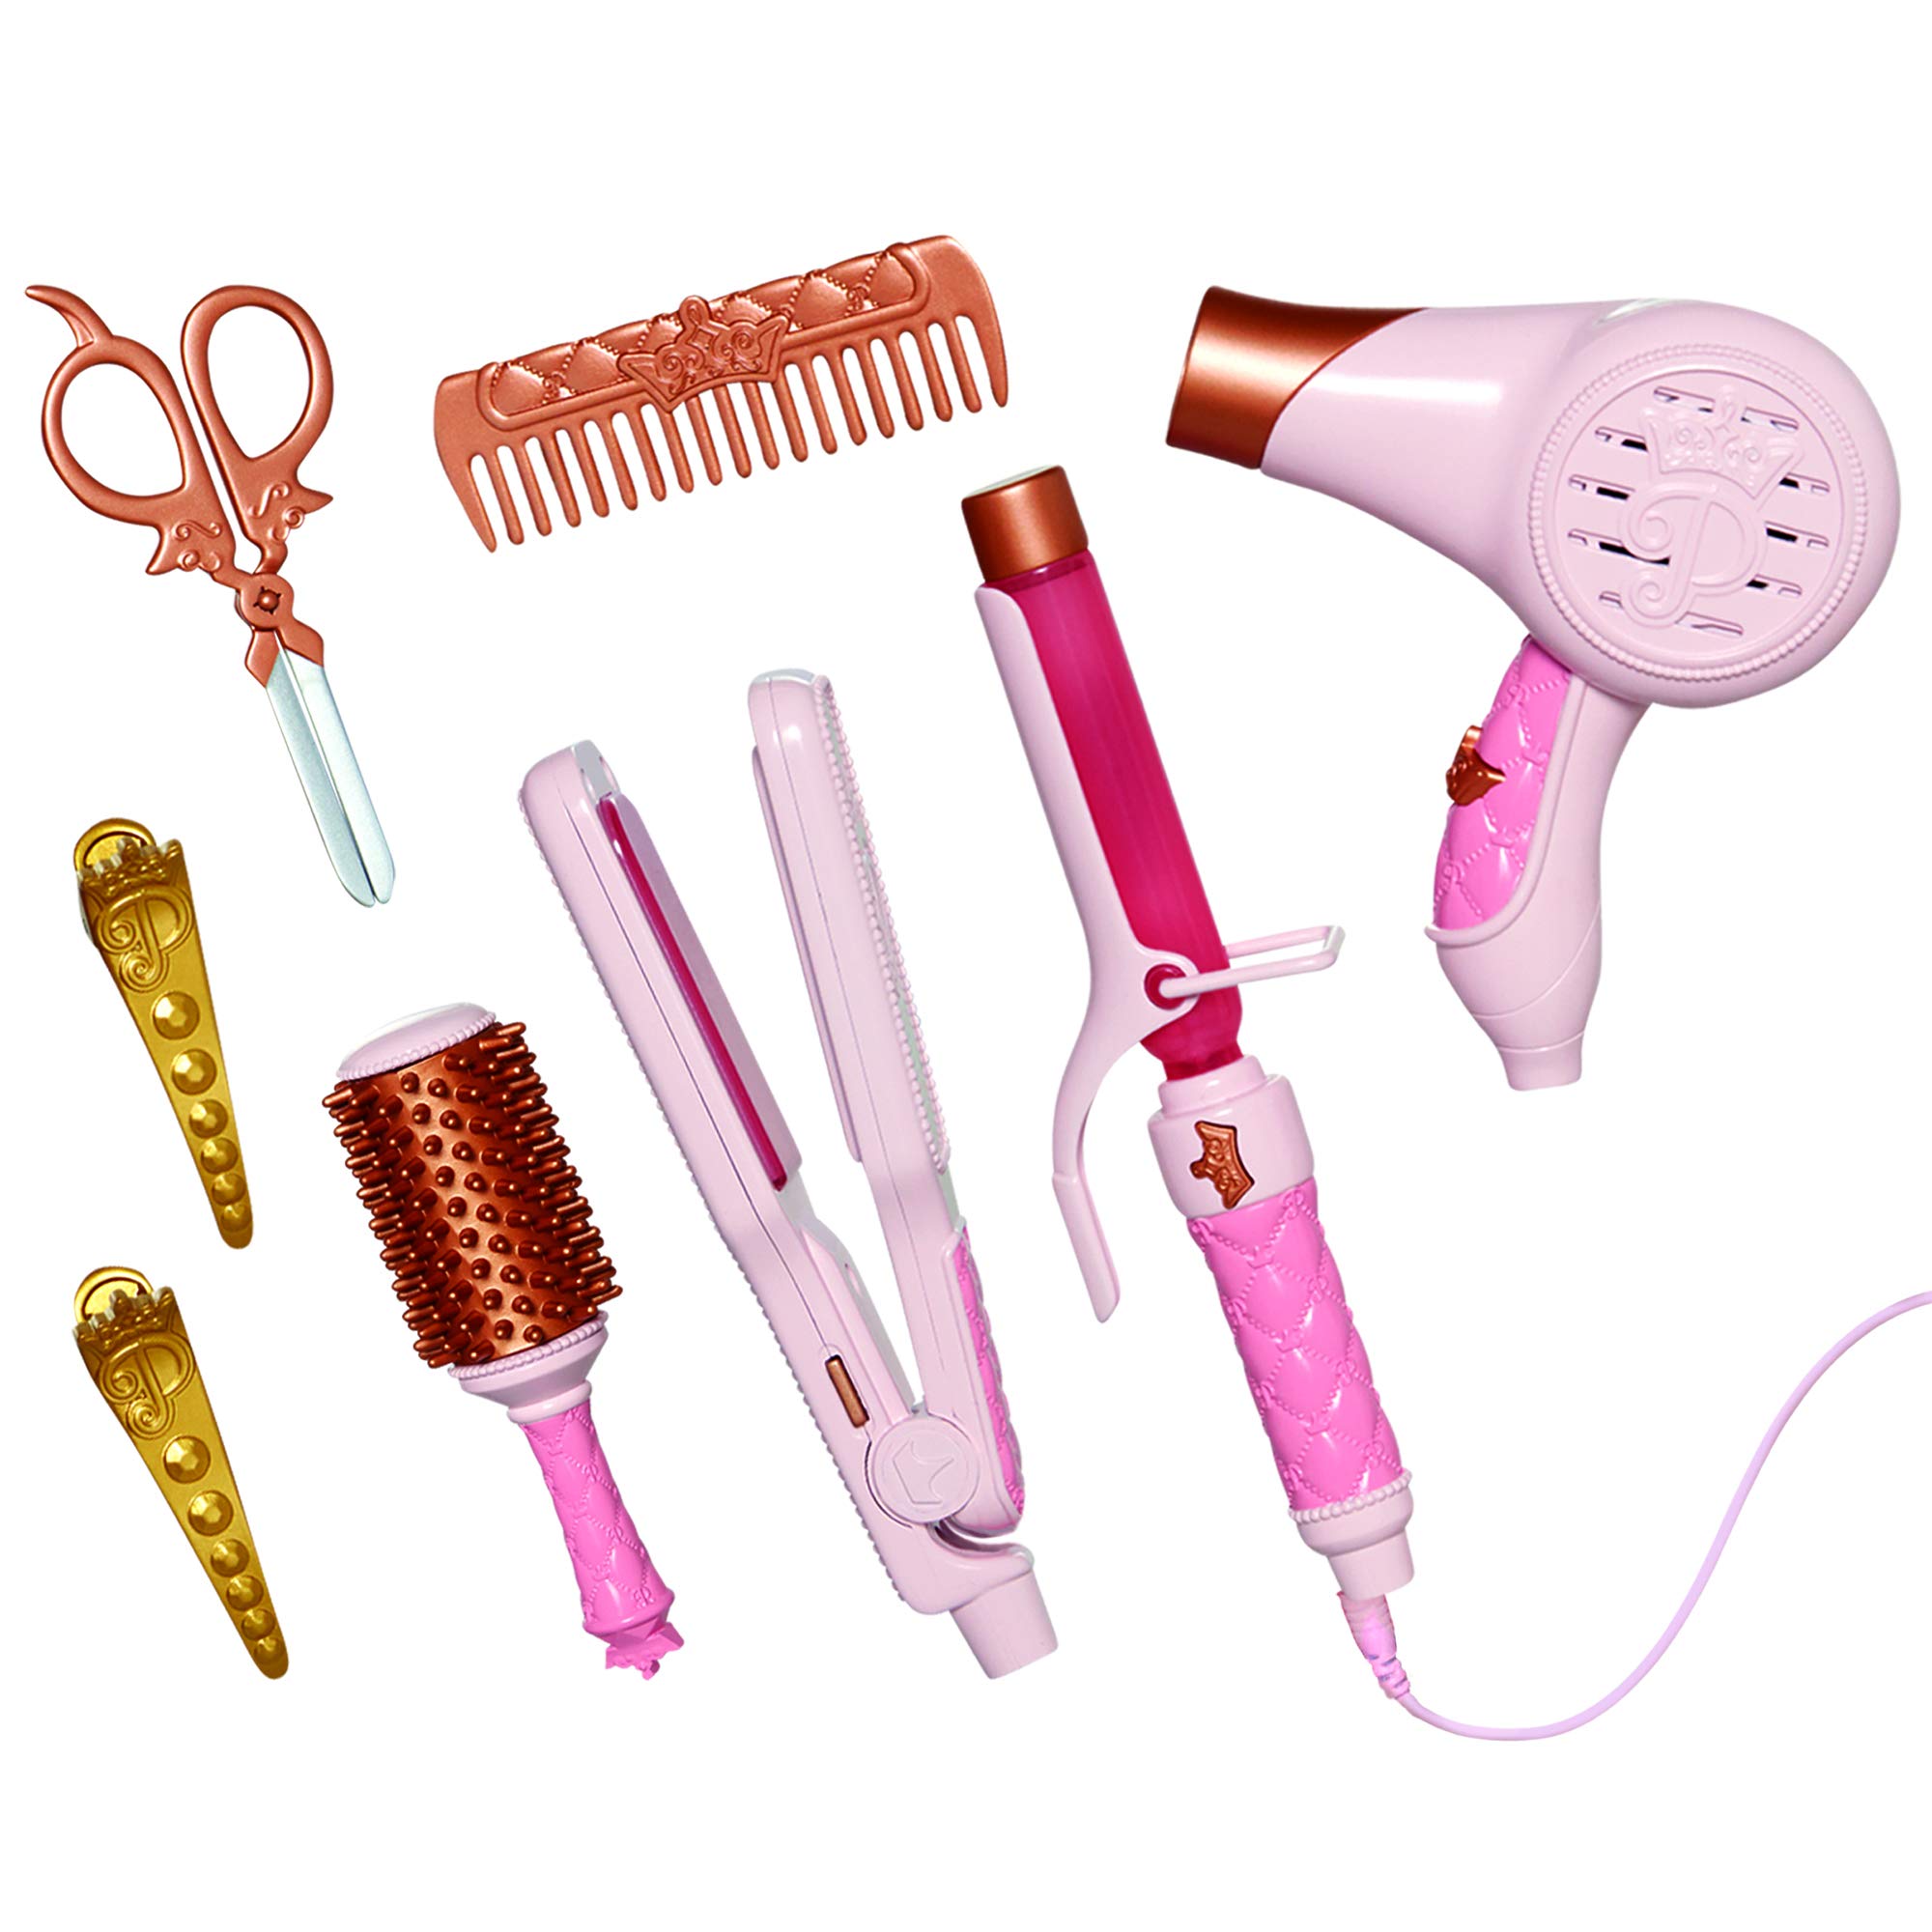 Disney Princess 210401 Disney Princess Vanity Style Collection Light Up and Style Vanity - Lights & Realistic Sound Styling Tools